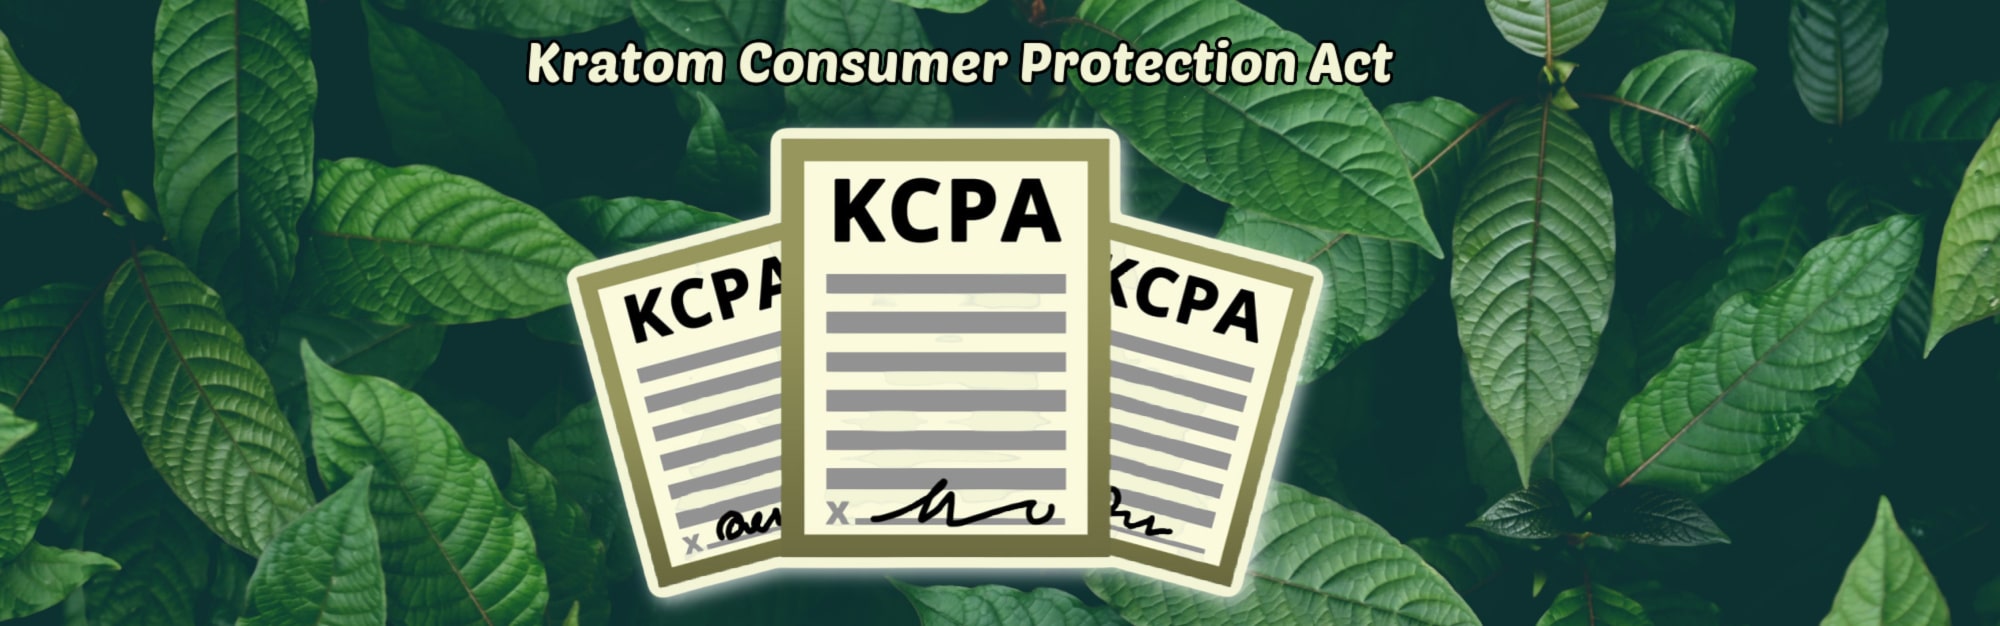 image of kratom consumer protection act